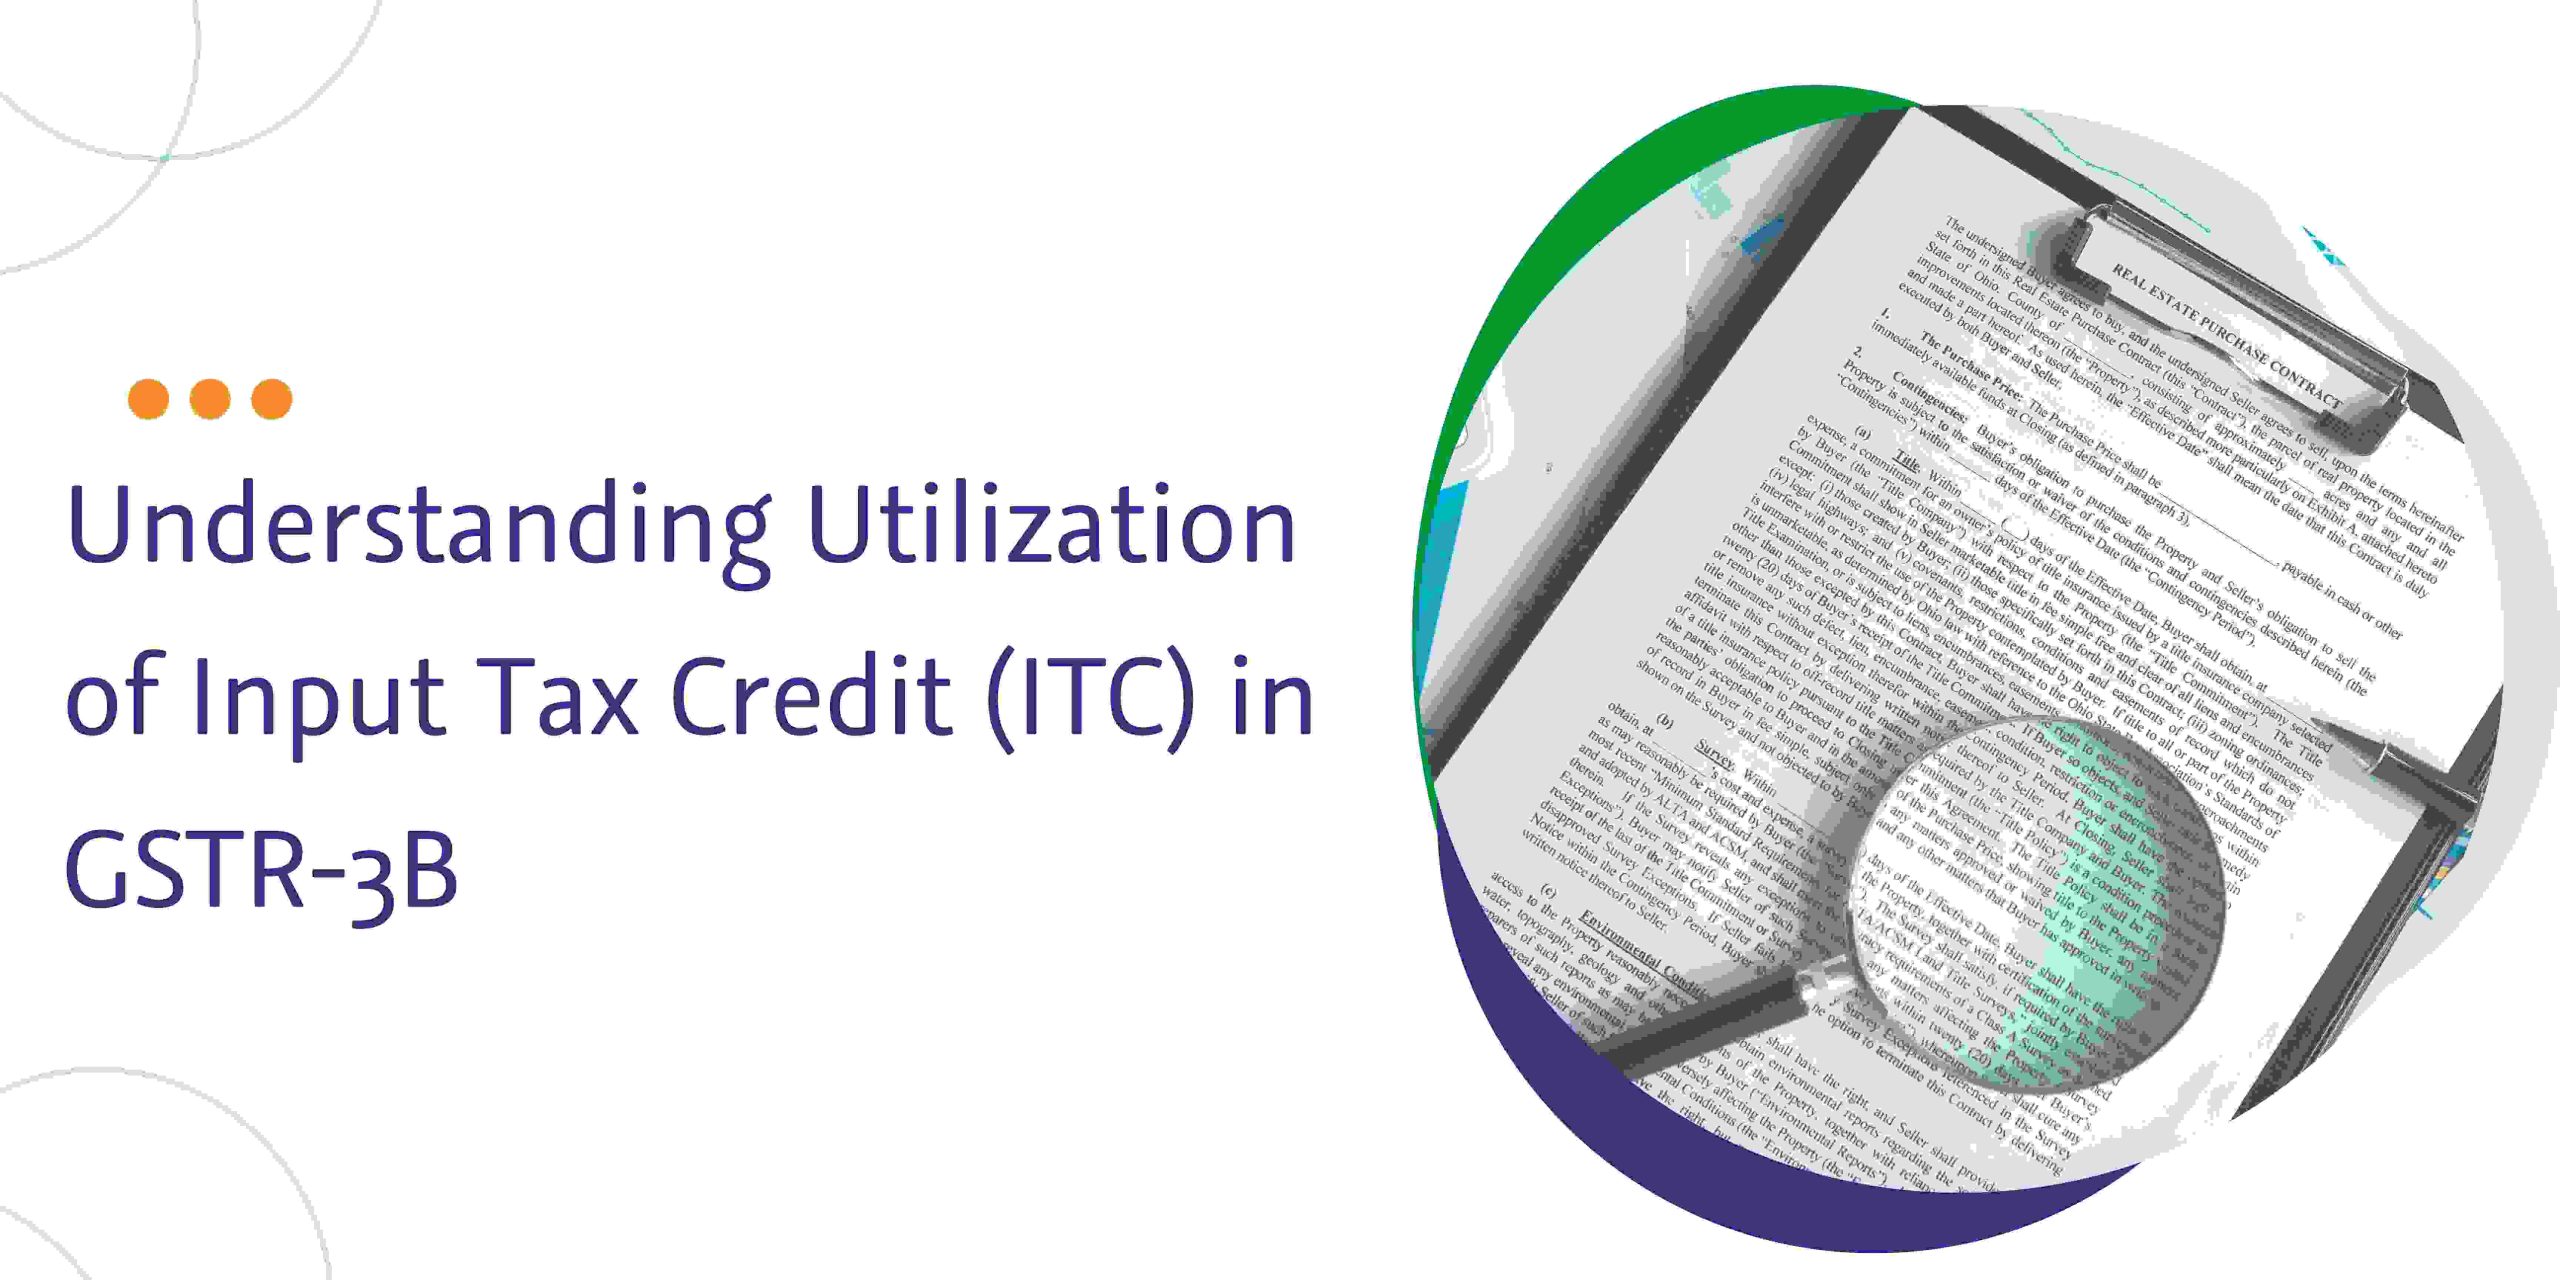 You are currently viewing Understanding Utilization of Input Tax Credit (ITC) in GSTR-3B